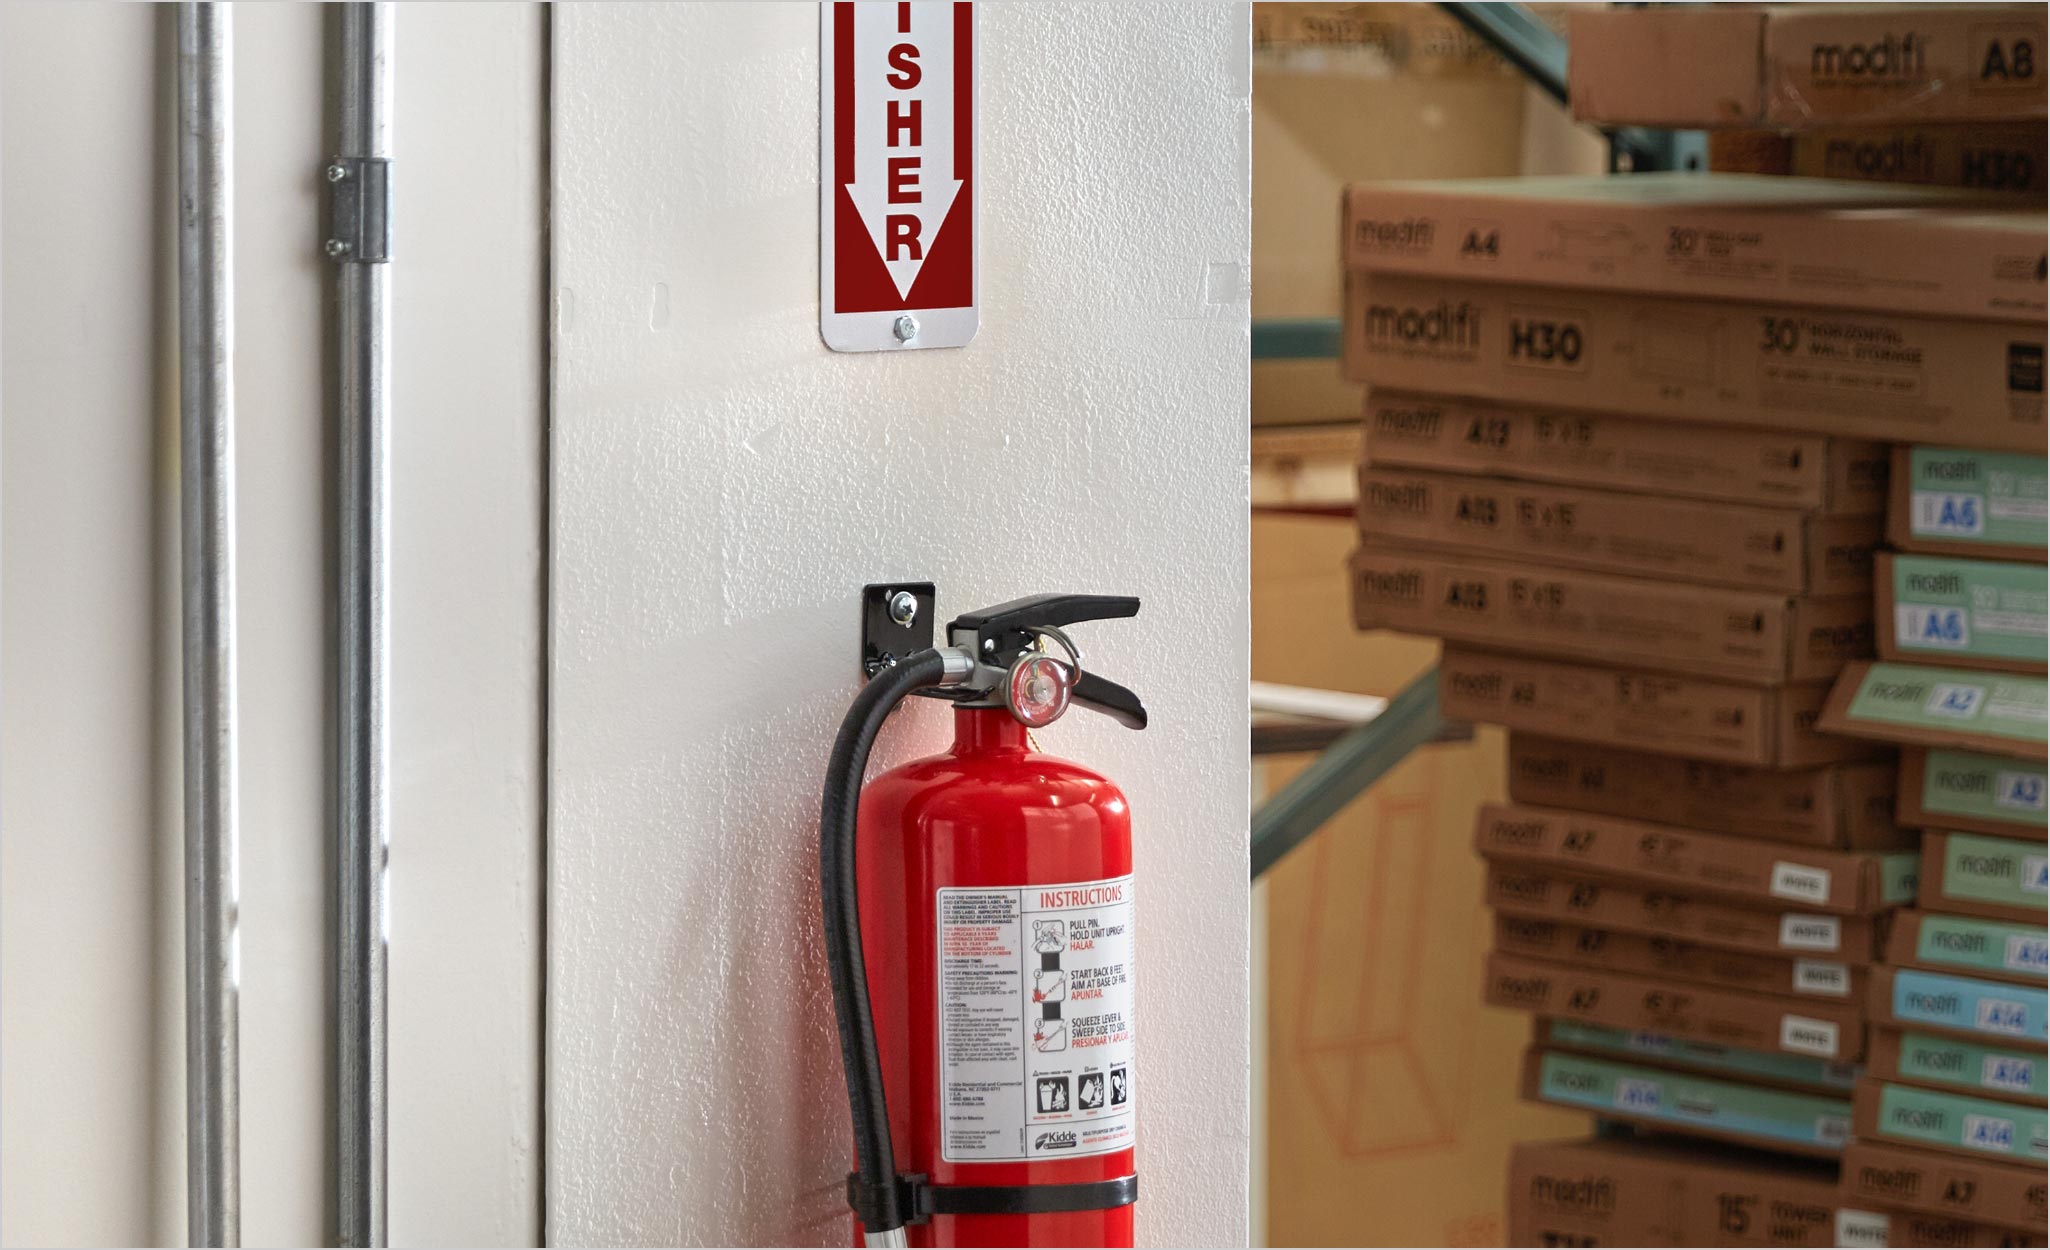 Wall Mounted Fire Extinguisher in a Warehouse of Type 2 Construction